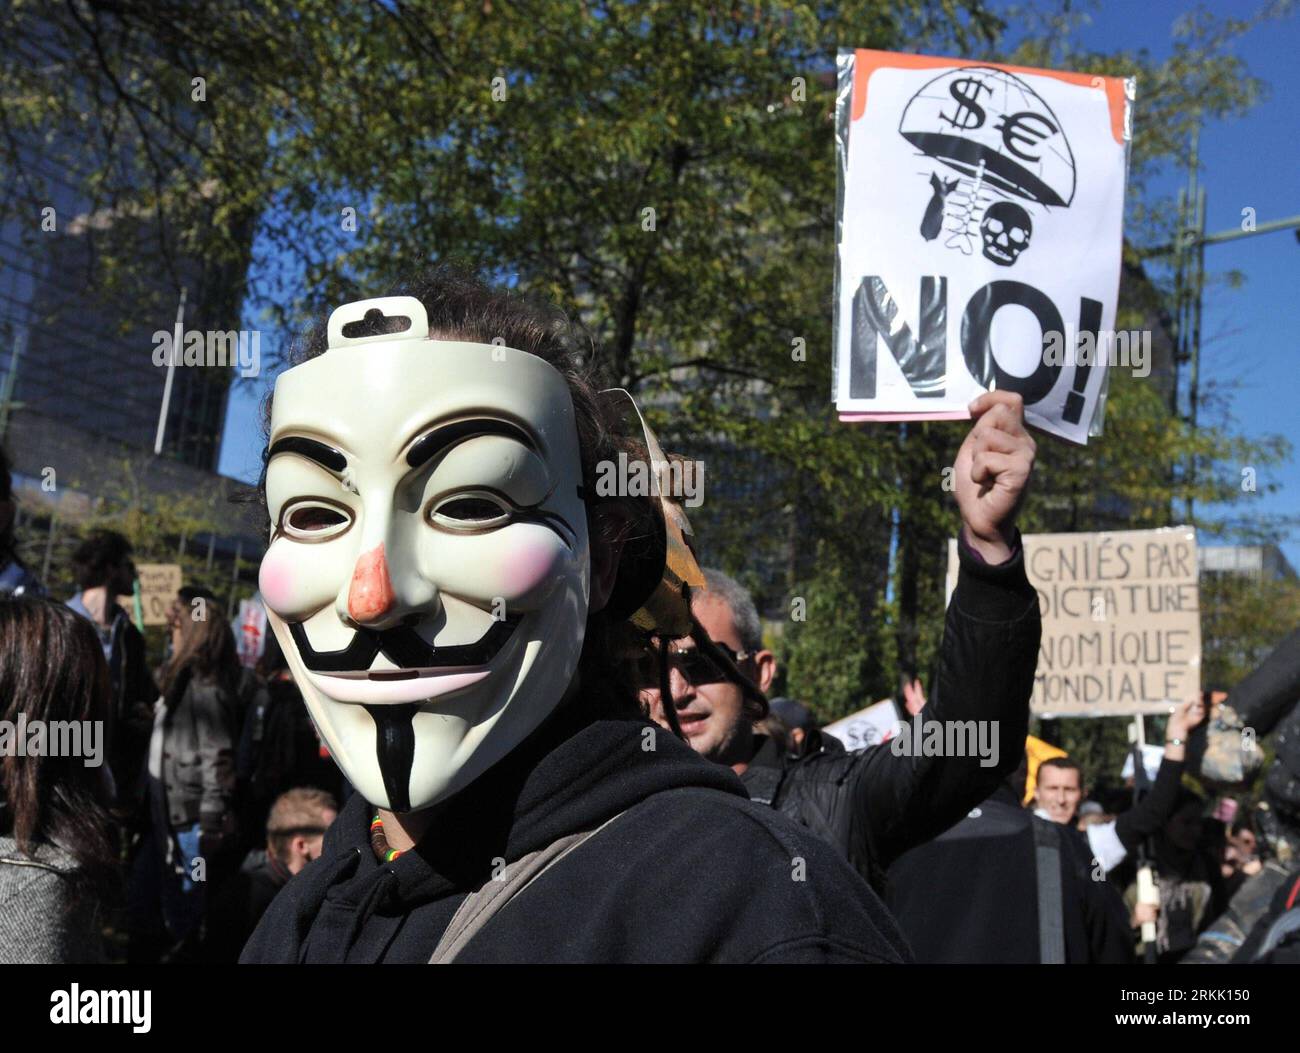 Bildnummer: 56182631  Datum: 15.10.2011  Copyright: imago/Xinhua (111015) -- BRUSSELS, Oct. 15, 2011(Xinhua) -- A masked-protestor takes part in a demonstration in Brussels, capital of Belgium on October 15, 2011. Protesters launched street demonstrations in more than 900 cities worldwide on Saturday, respond the Occupy Wall Street and Indignant movements, against capitalism and banking system. (Xinhua/Wu Wei)(yt) BELGIUM-BRUSSELS-ECONOMY-PROTEST PUBLICATIONxNOTxINxCHN Gesellschaft Politik Wirtschaft Protest Demo Finanzkrise Demo Occupy Finanzwirtschaft Antikapitalismus Anti Kapitalismus Kapit Stock Photo